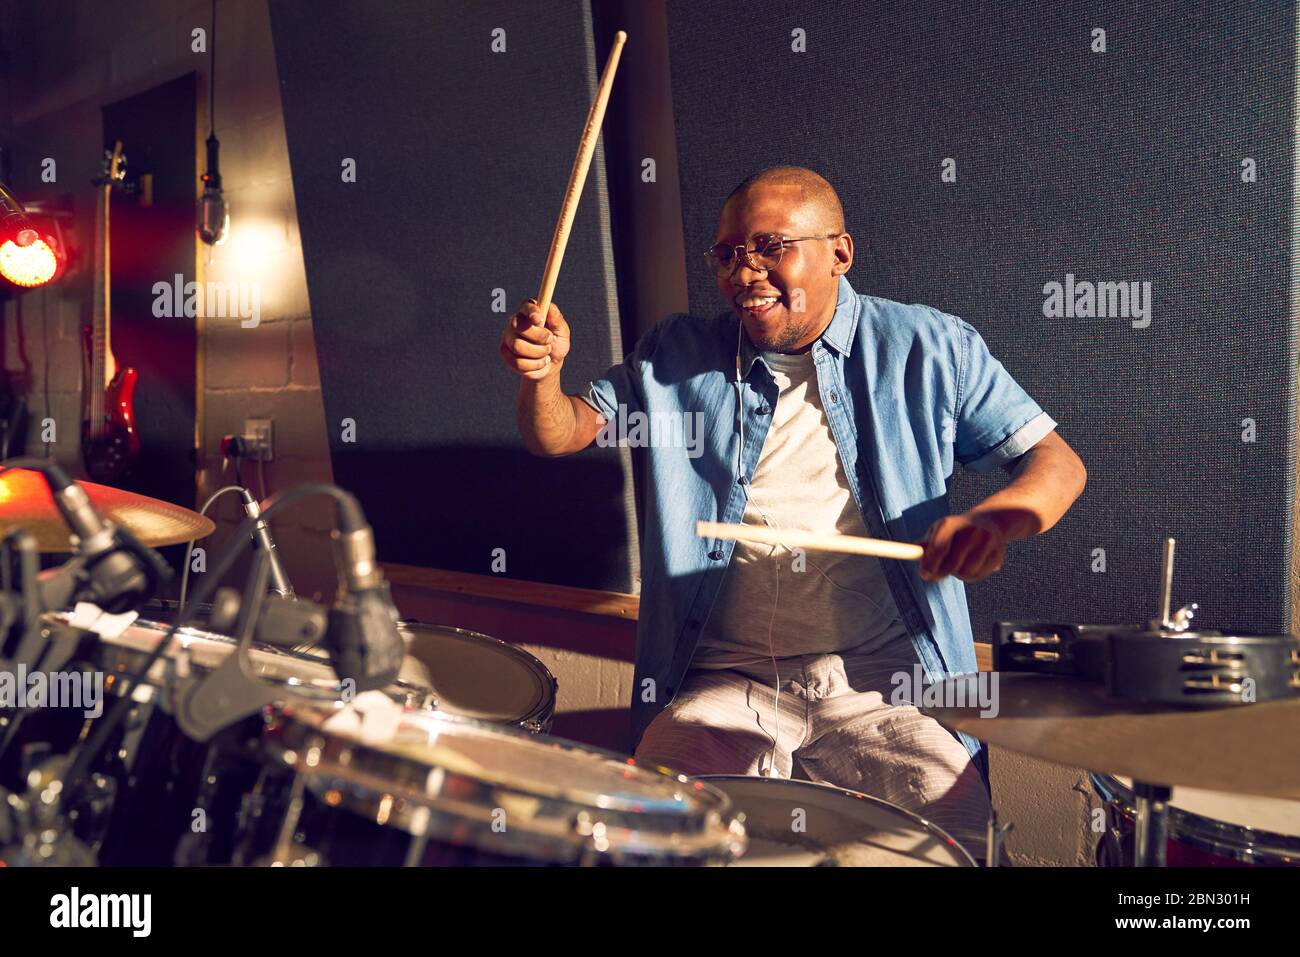 Smiling young male drummer playing drums in recording studio Stock Photo